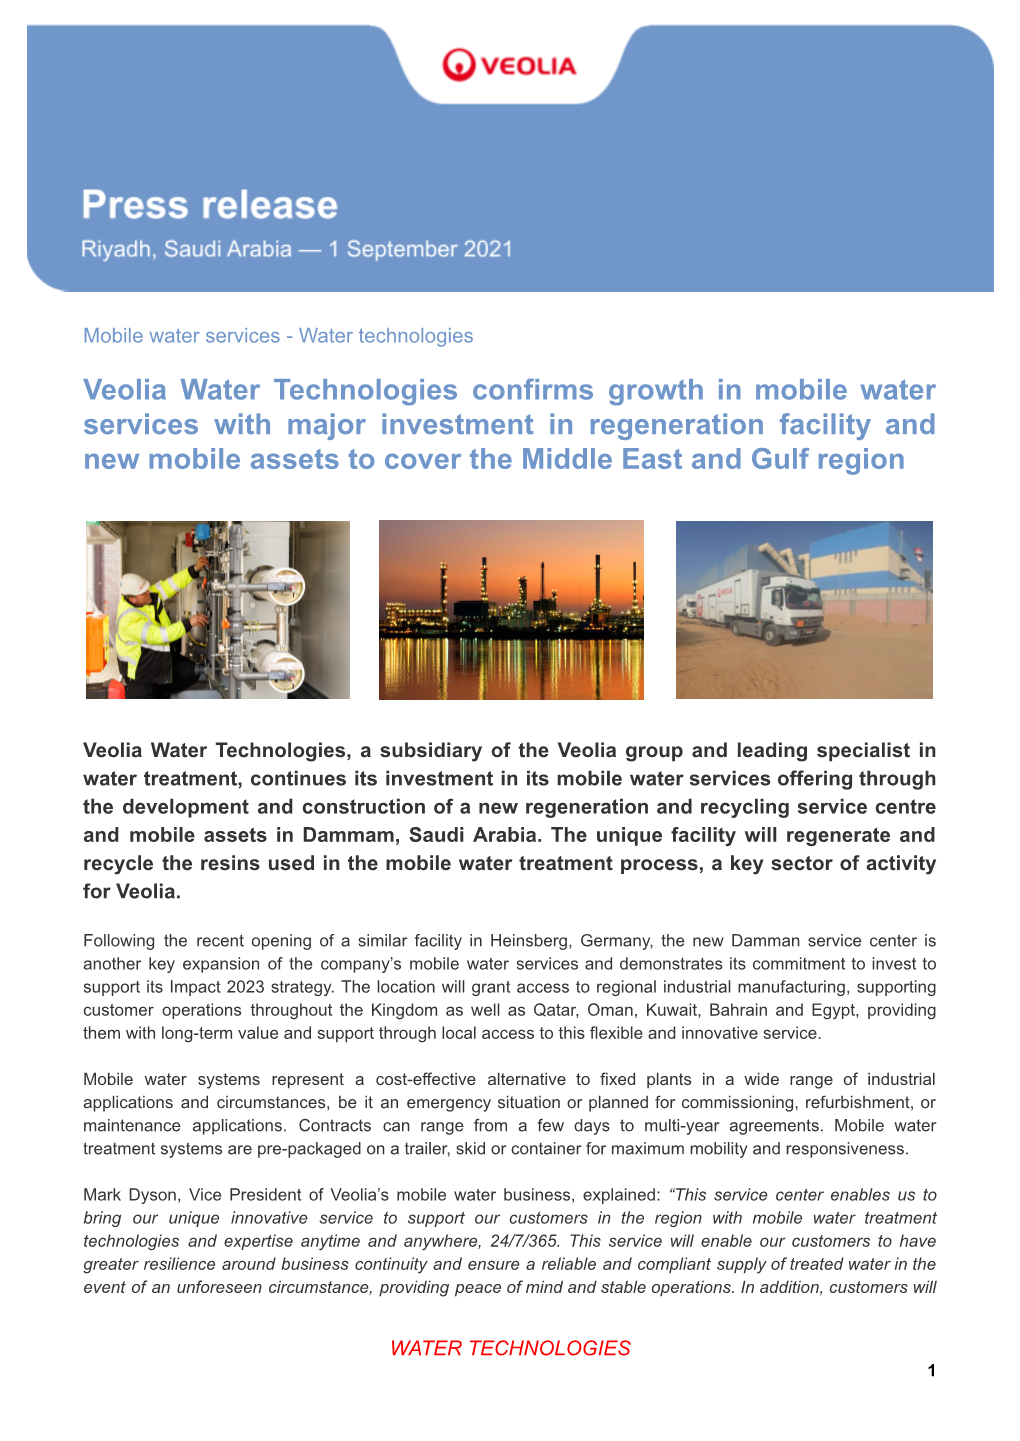 2021-09-01 Veolia Confirms Growth in Mobile Water Services with Major